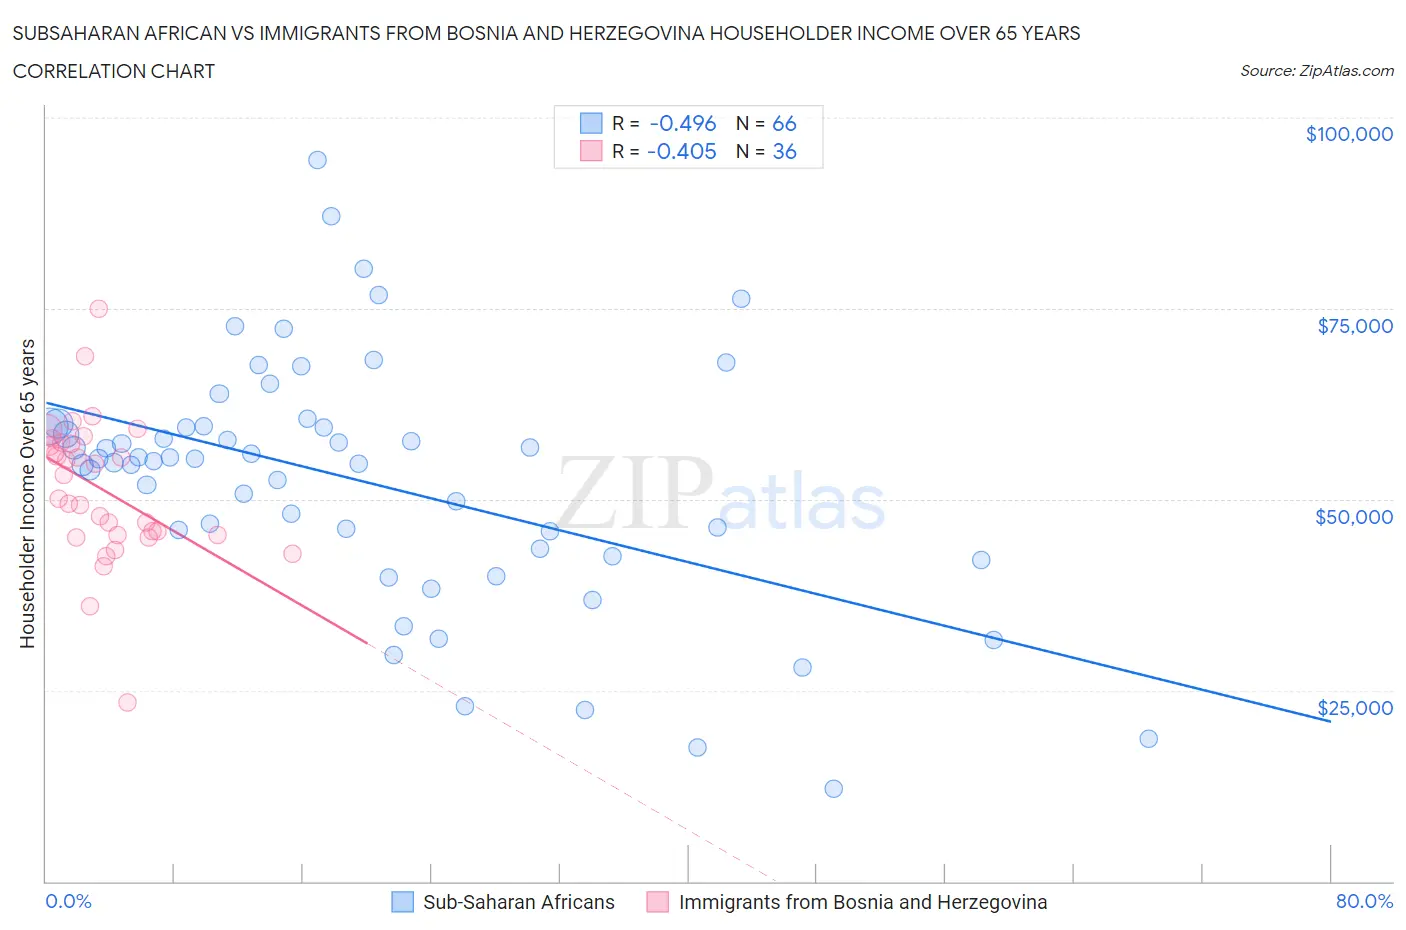 Subsaharan African vs Immigrants from Bosnia and Herzegovina Householder Income Over 65 years